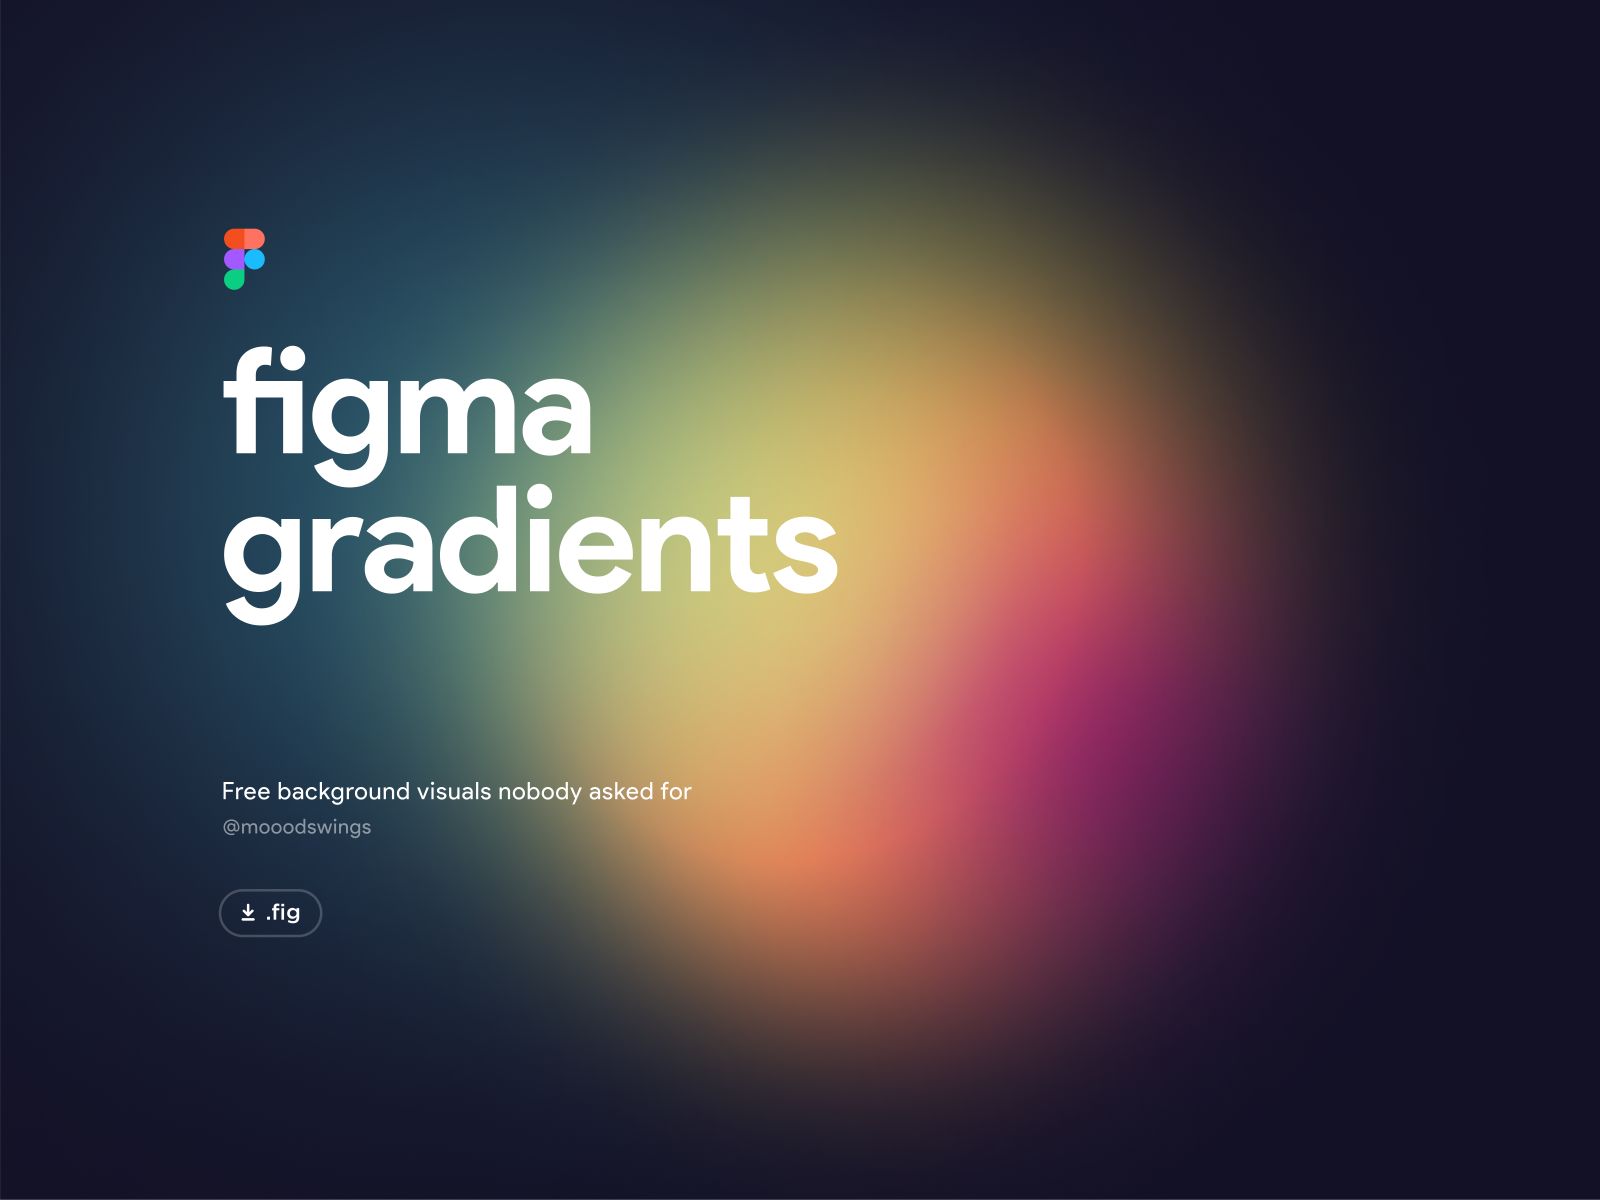 figma gradient background visuals freebie abstract art-direction background backgrounds beam colorful cover download figma free freebie lighting lights product design tech ui vector visuals